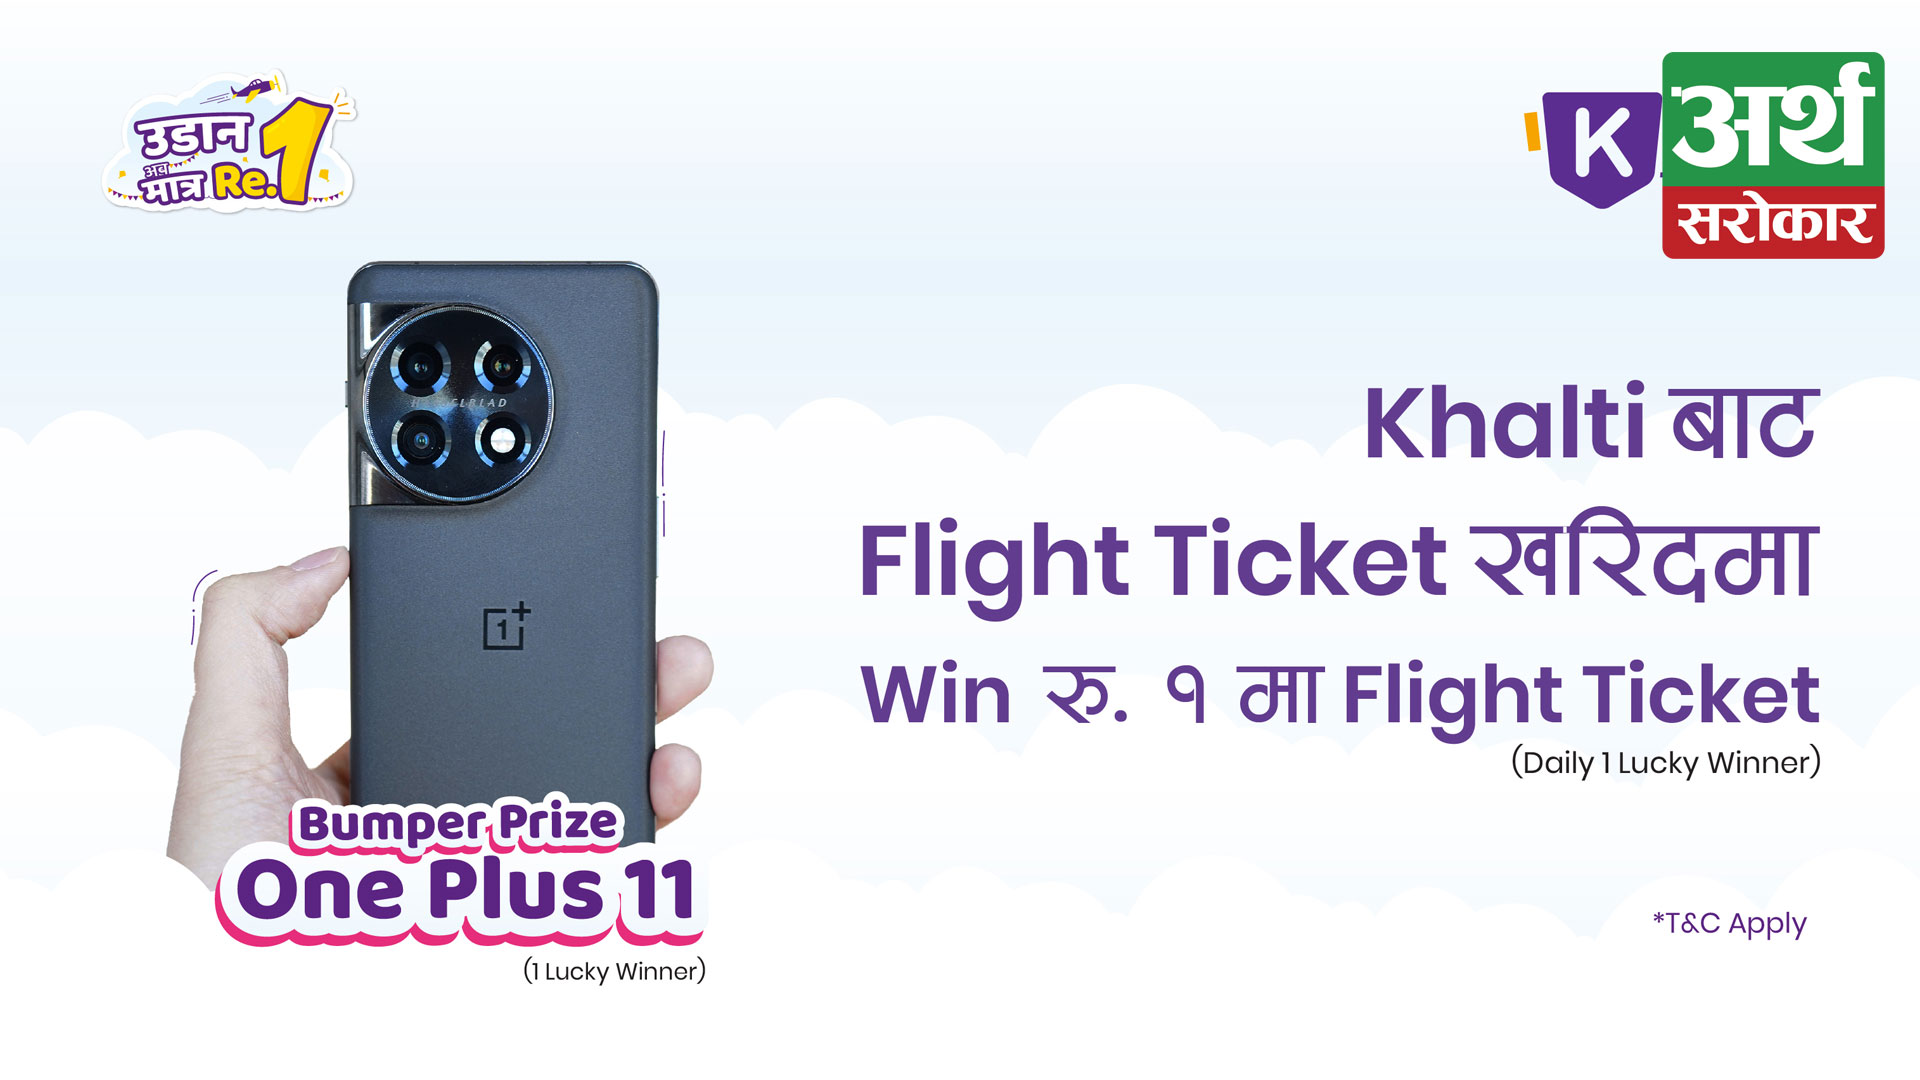  Win Flight ticket at Re.1 daily and Oneplus 11 bumper prize on flight booking from Khalti